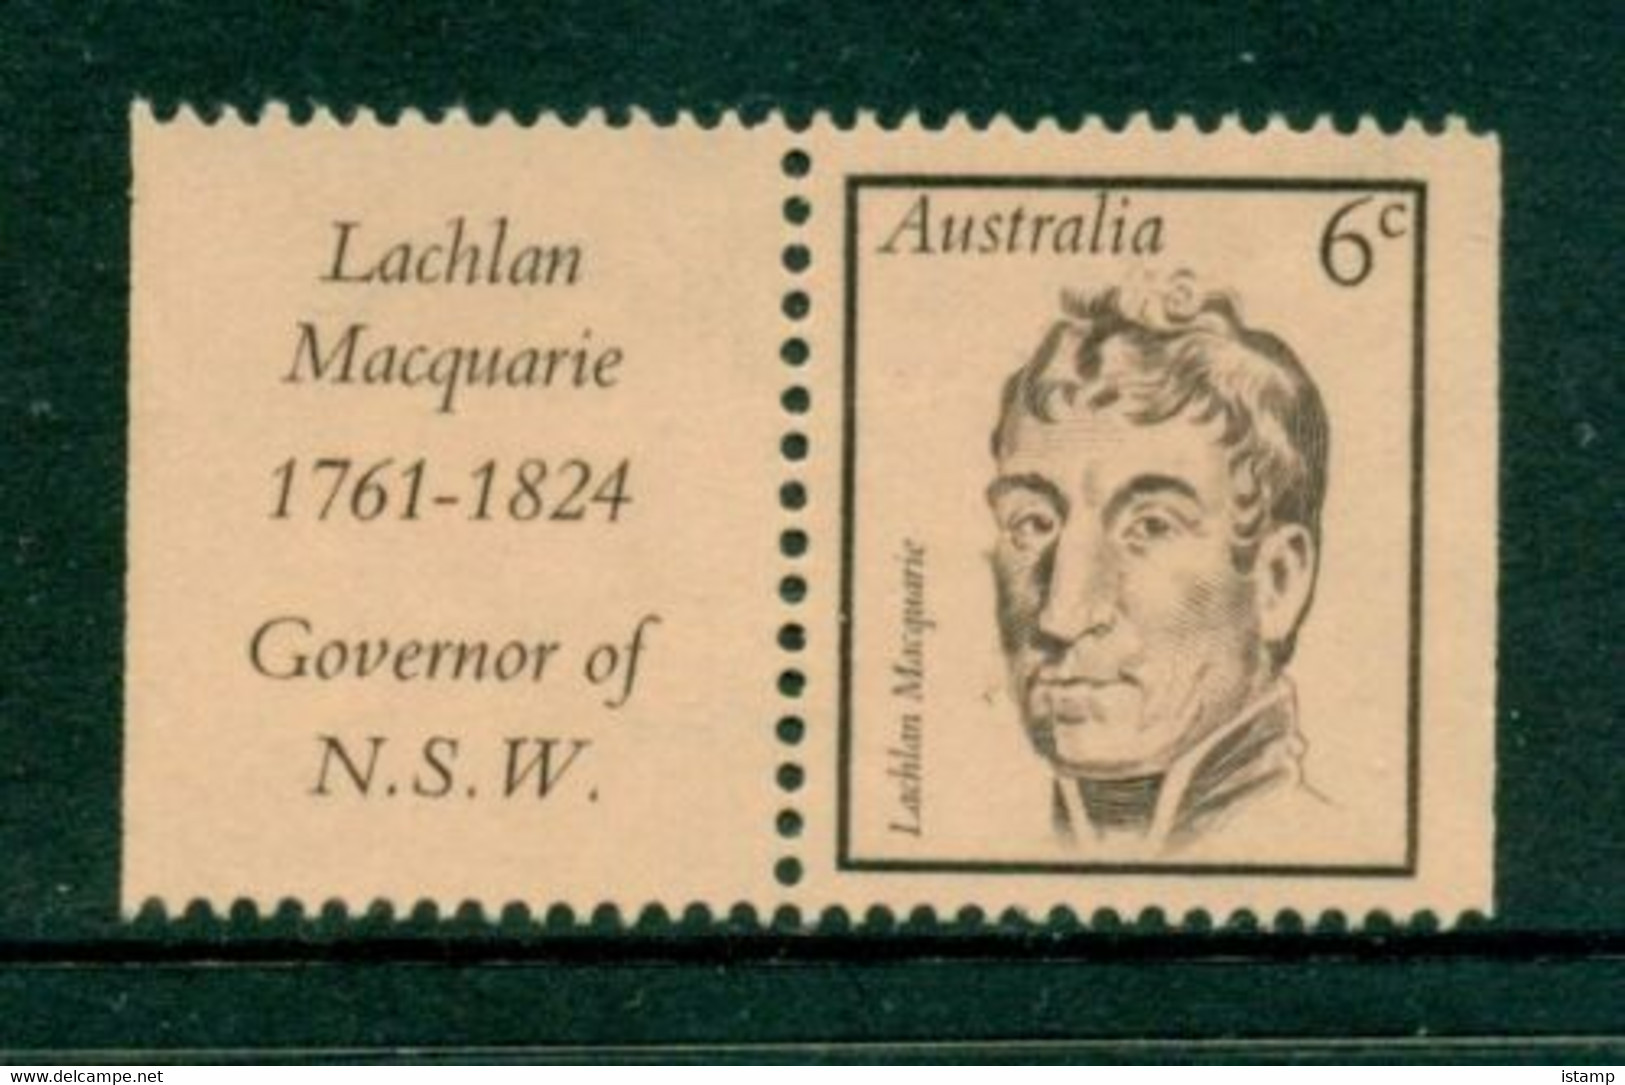 ⭕1970 - Australia Famous Australians (3rd Series) 'Lachlan Macquarie - Governor Of NSW With Tab' - 6c Stamp MNH⭕ - Mint Stamps